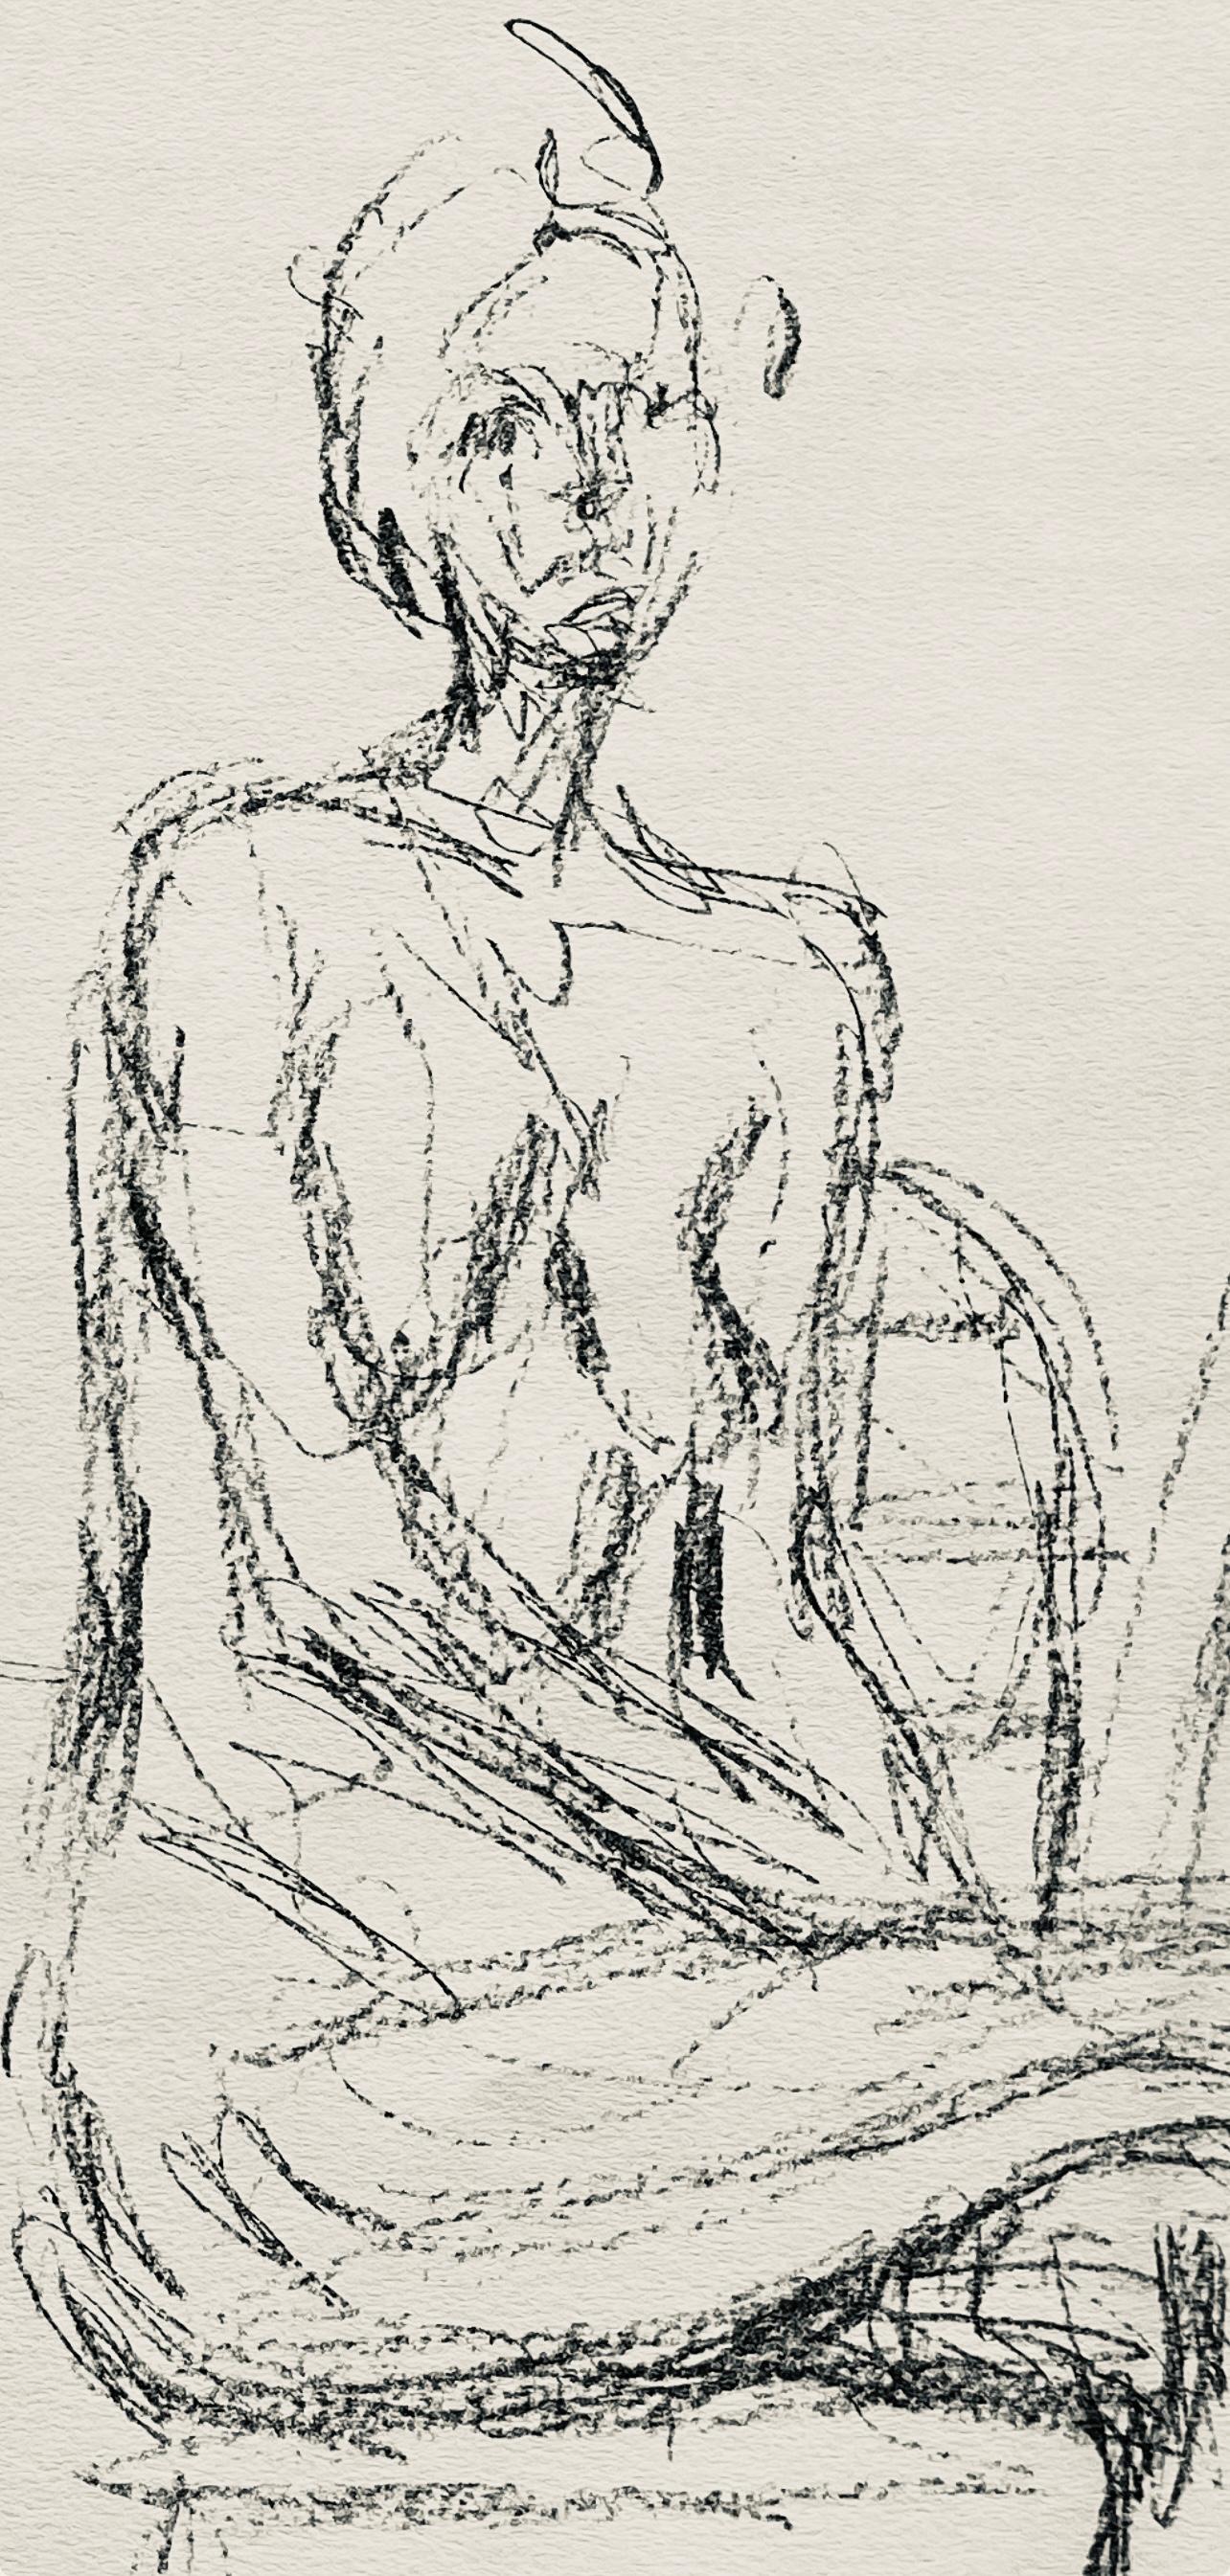 Giacometti, Composition, Derrière le miroir (after) - Modern Print by Alberto Giacometti